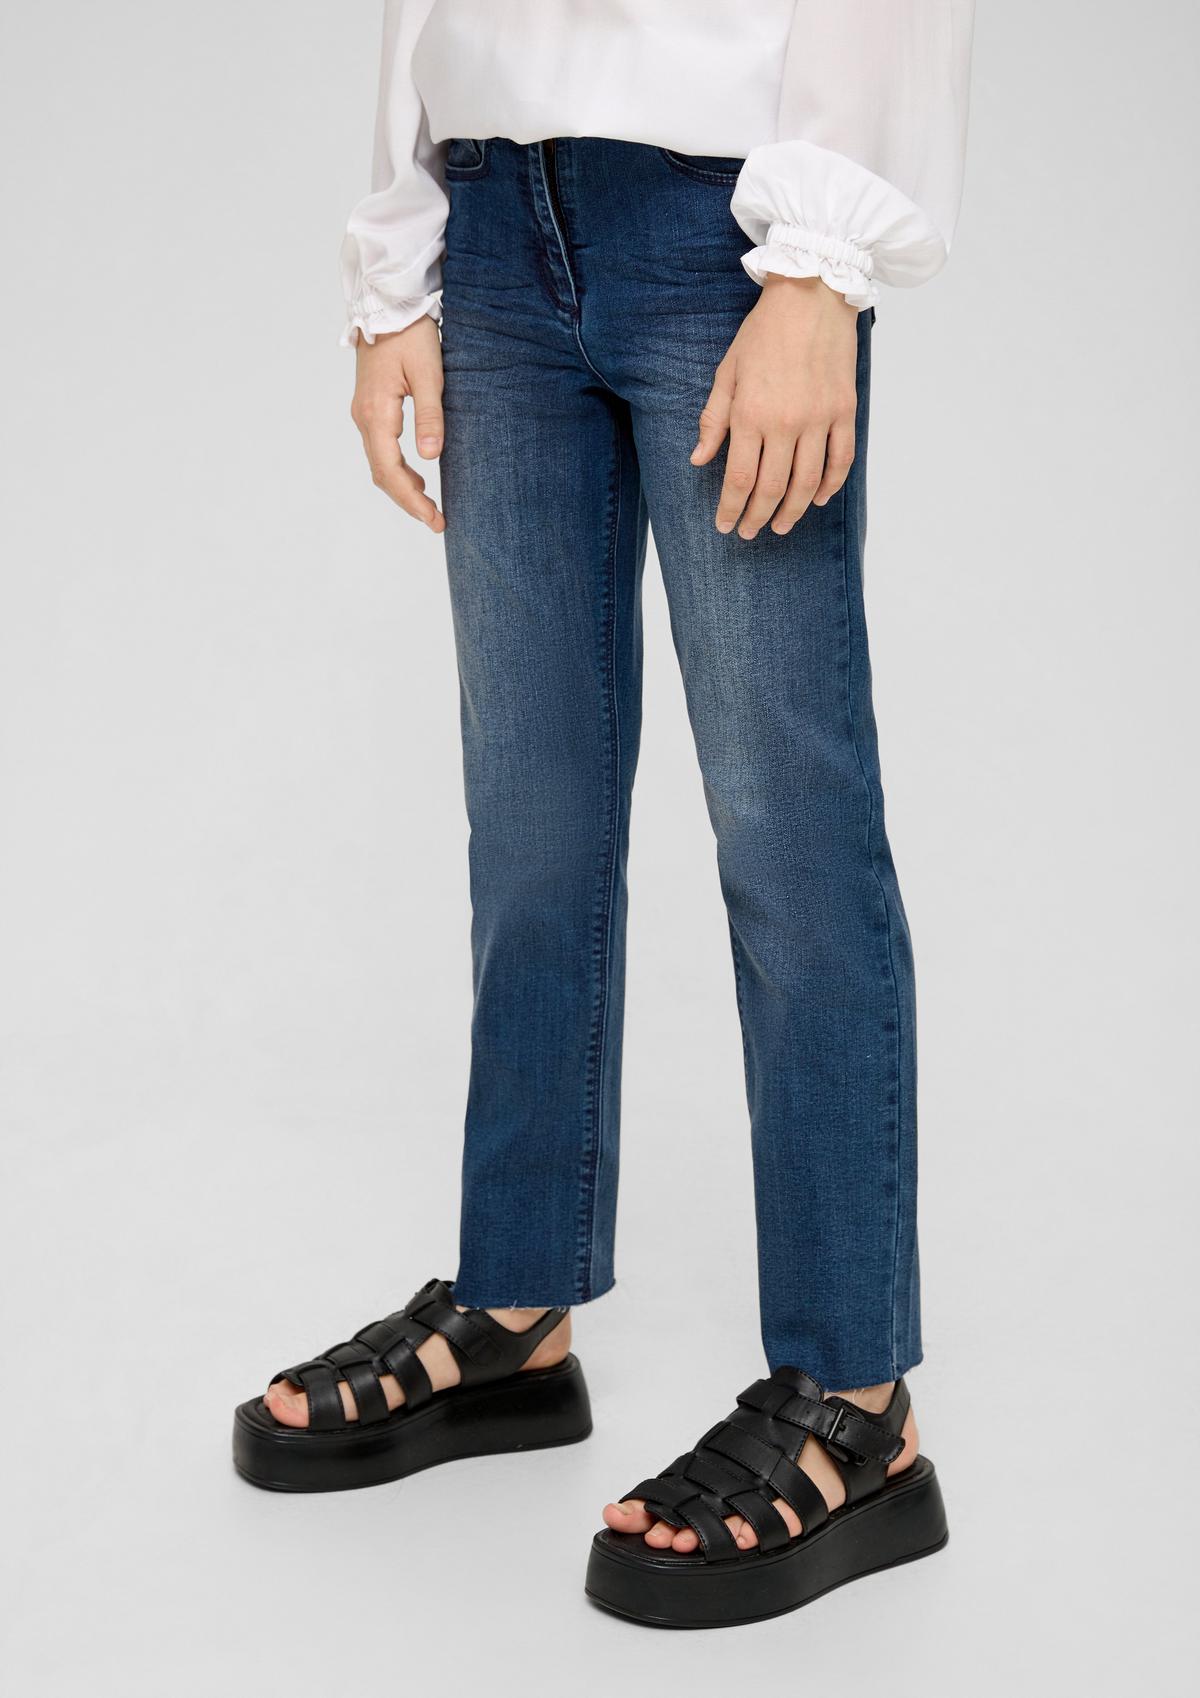 s.Oliver Ankle-Jeans / Regular Fit / Mid Rise / Straight Leg